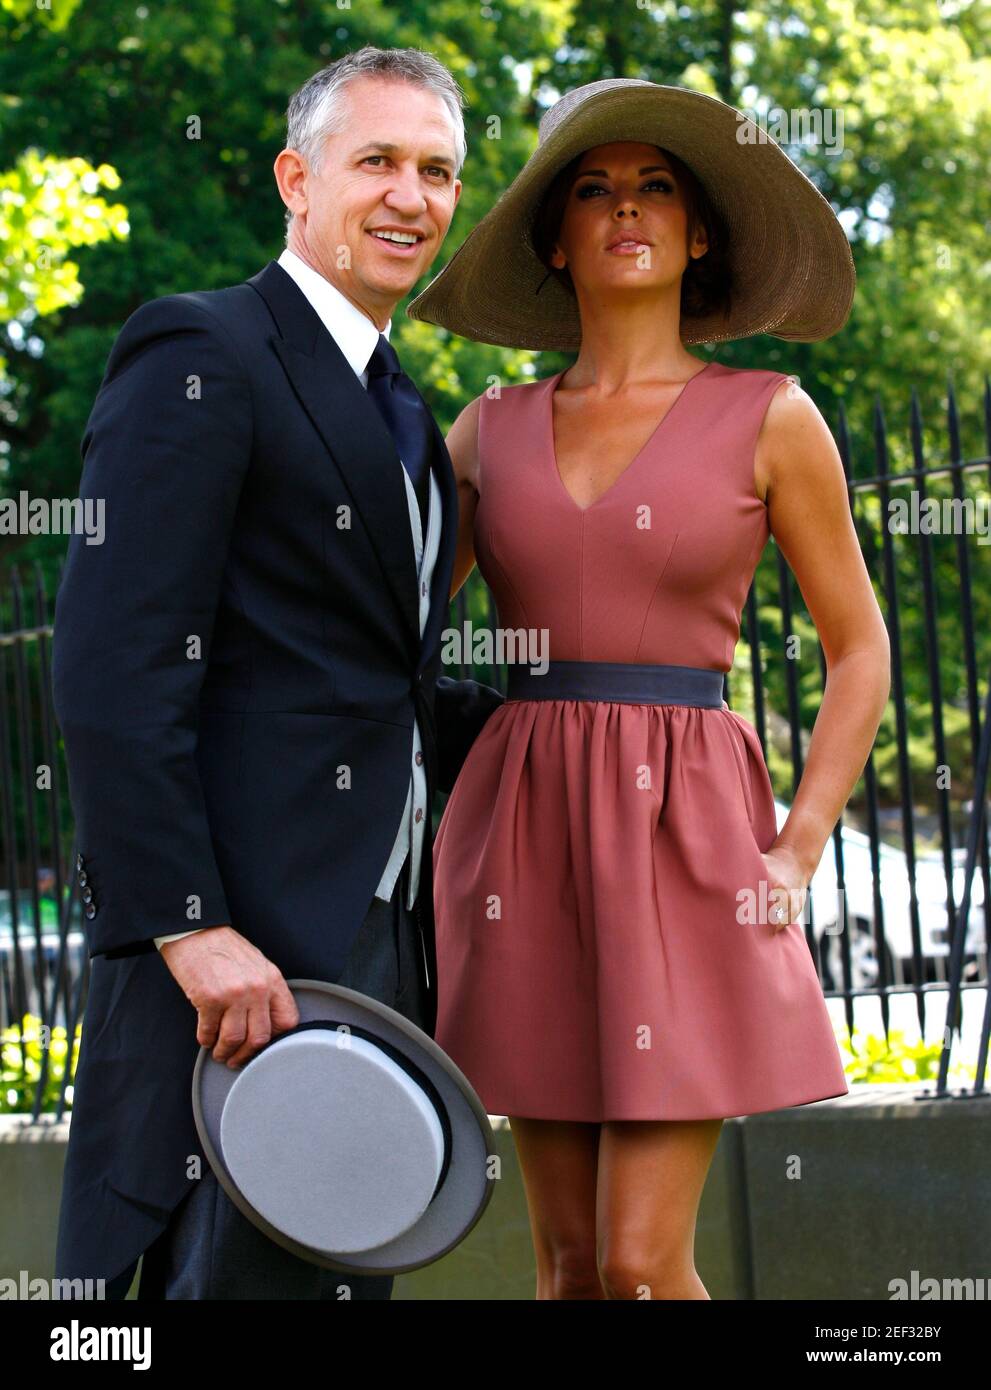 Horse Racing - Royal Ascot  - Ascot Racecourse - 14/6/11  Ex footballer and tv presenter Gary Lineker and his wife Danielle Bux at Ascot  Mandatory Credit: Action Images / Paul Harding Stock Photo